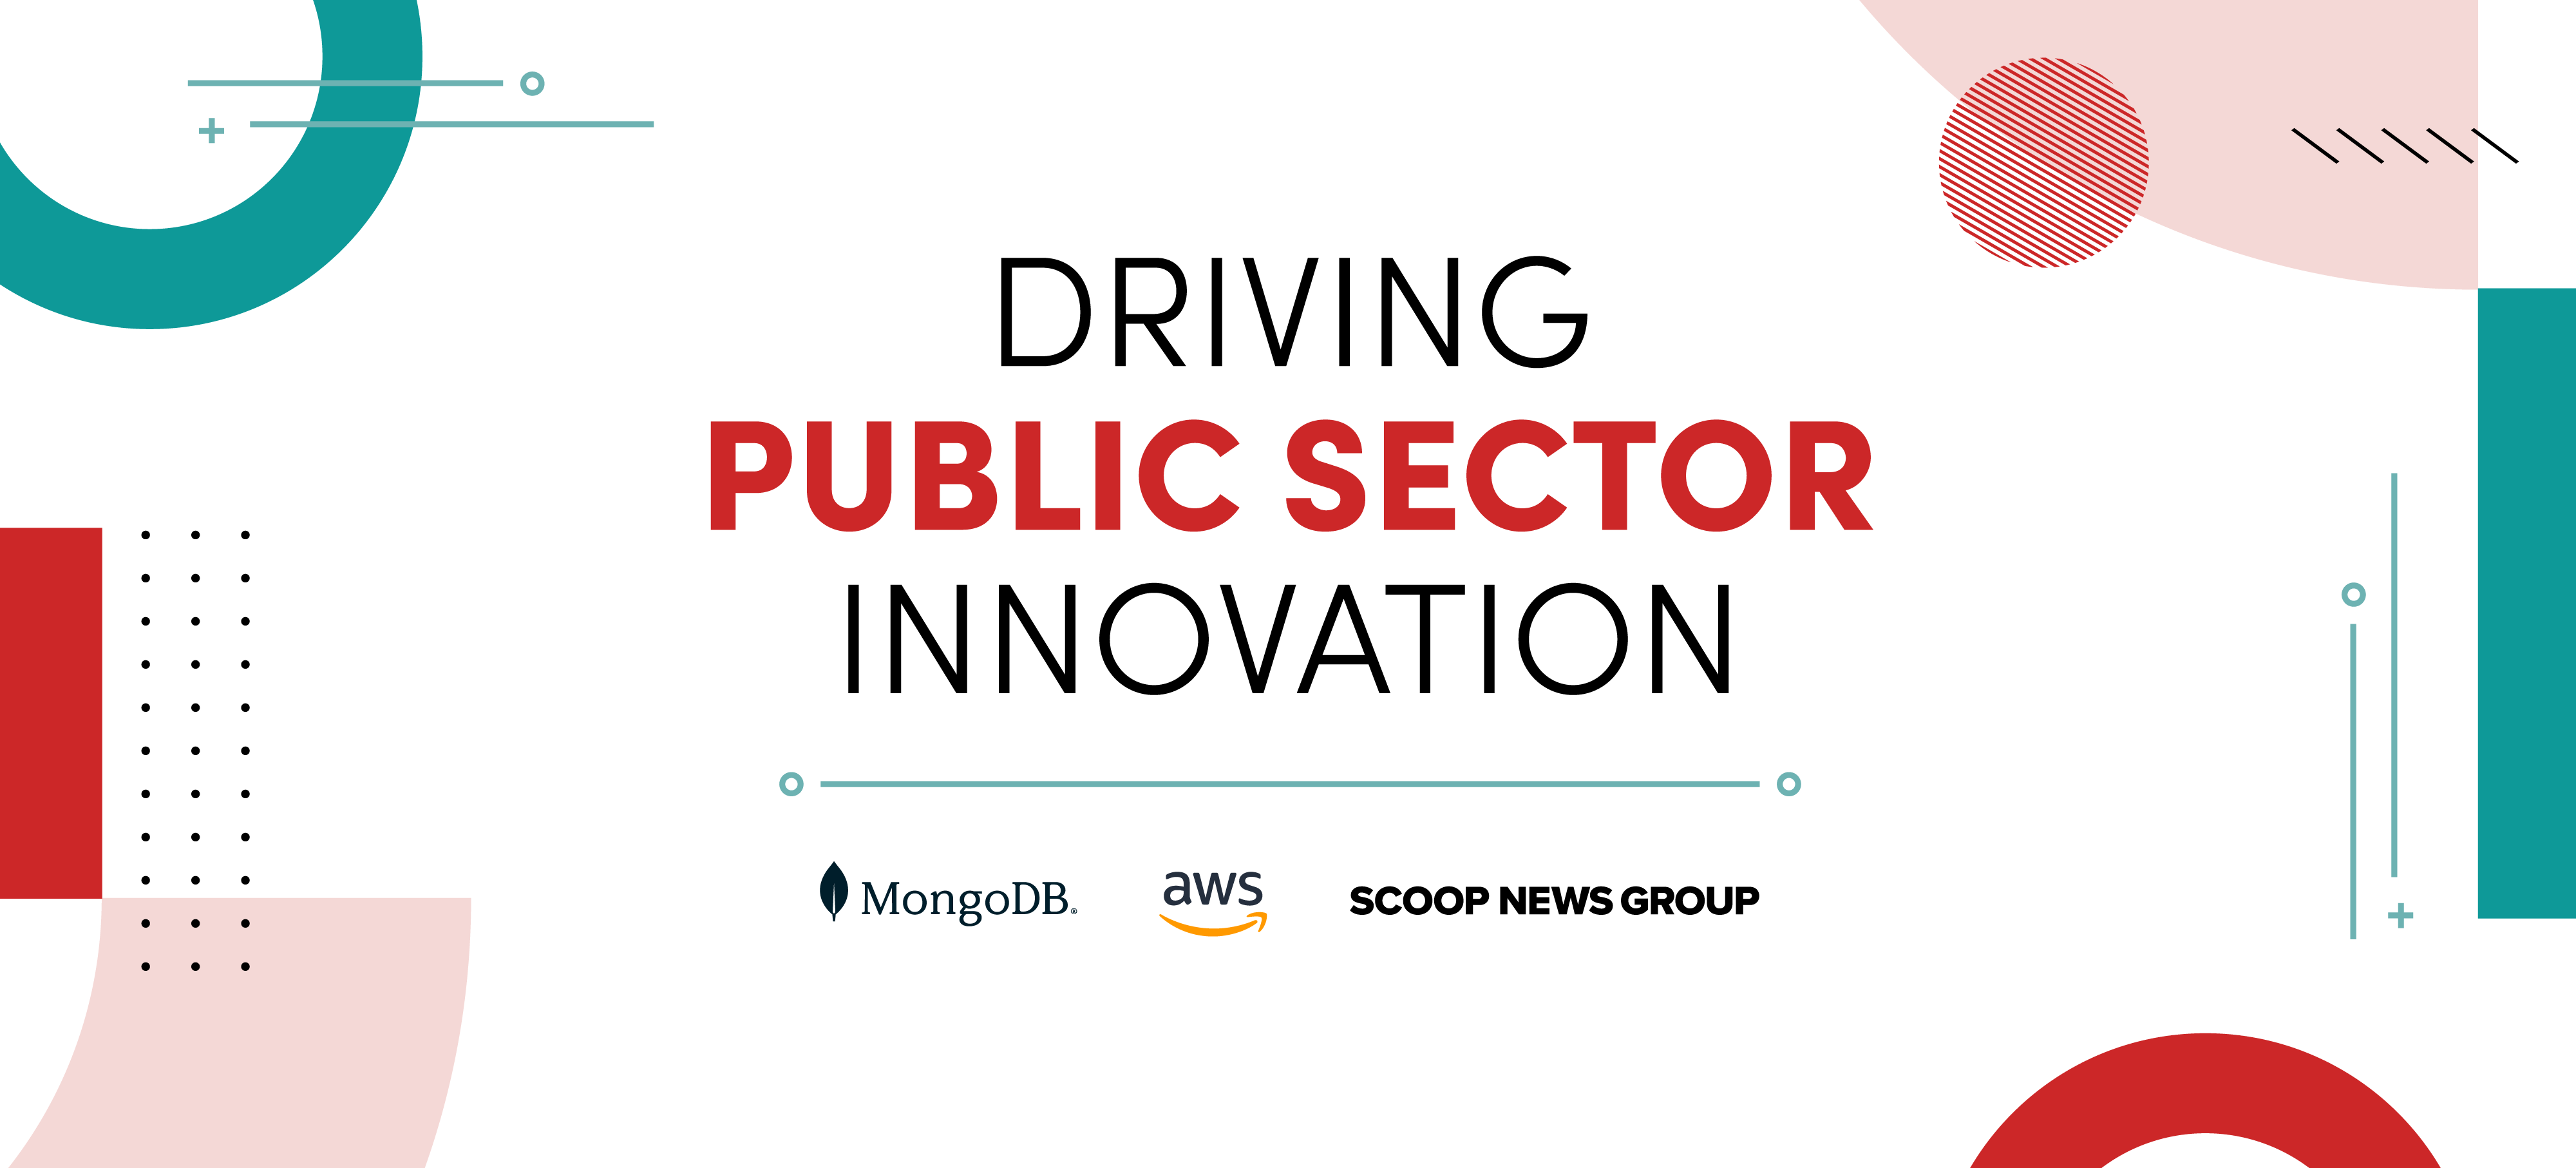 Driving Public Sector Innovation - MongoDB AWS Scoop News Group